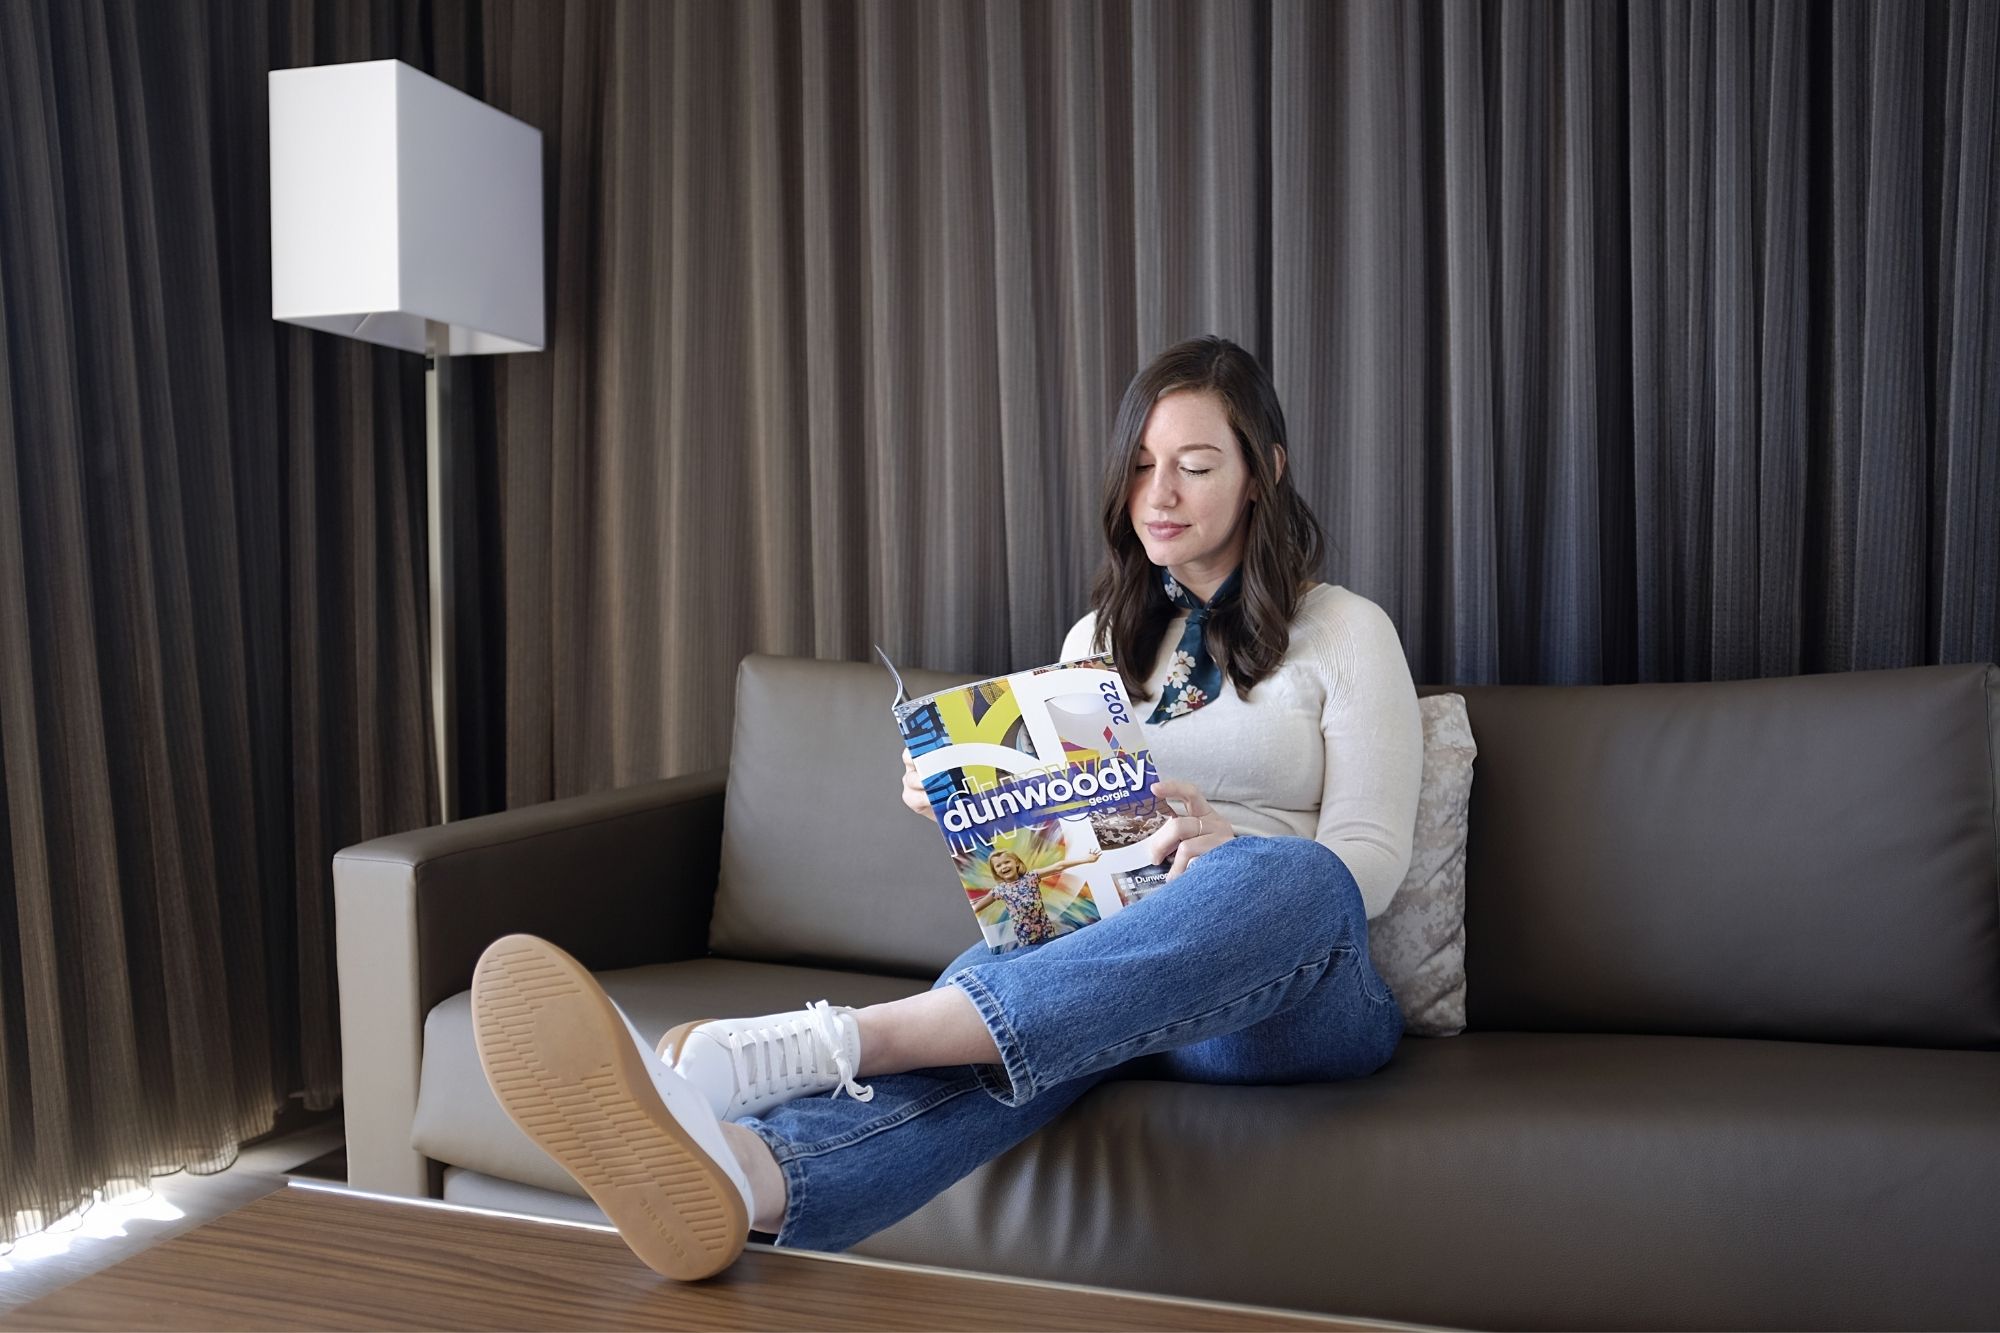 Alyssa reads the Discover Dunwoody guide in a hotel room